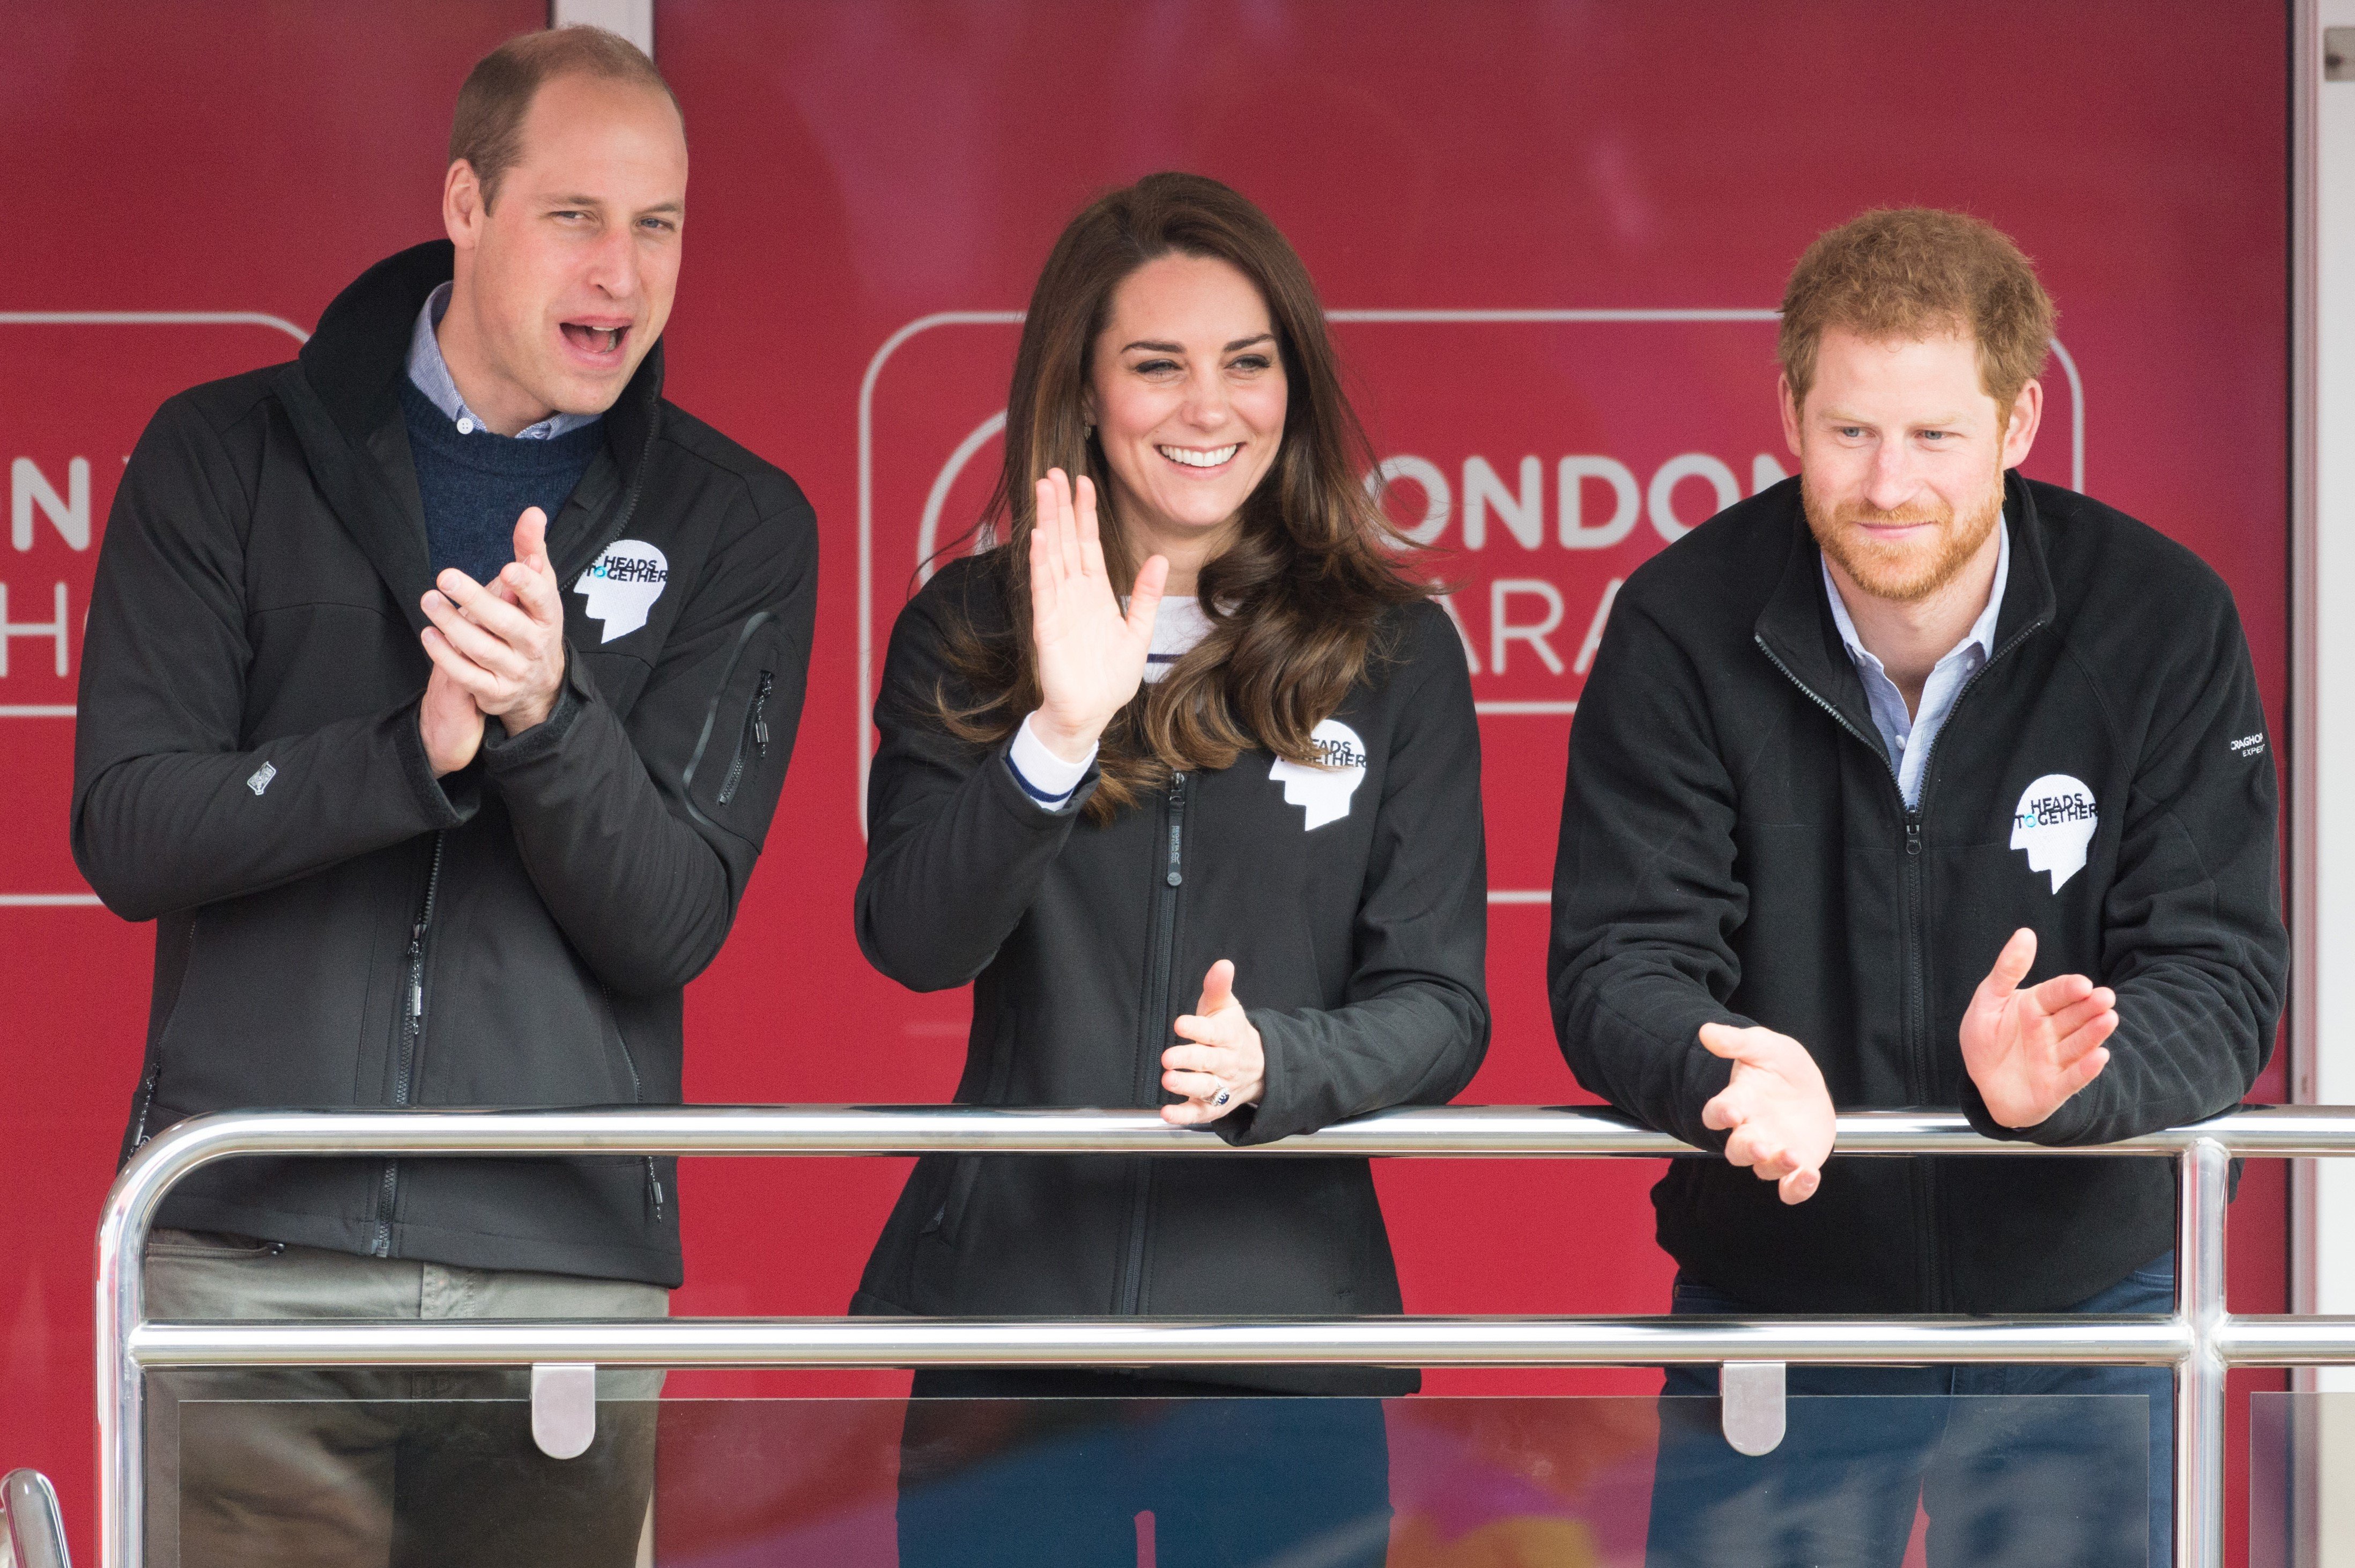 Prince William, Duke of Cambridge, Catherine, Duchess of Cambridge and Prince Harry watch the men's Elite race of the Virgin Money London Marathon in London, England, on April 23, 2017. |  Source: Getty Images